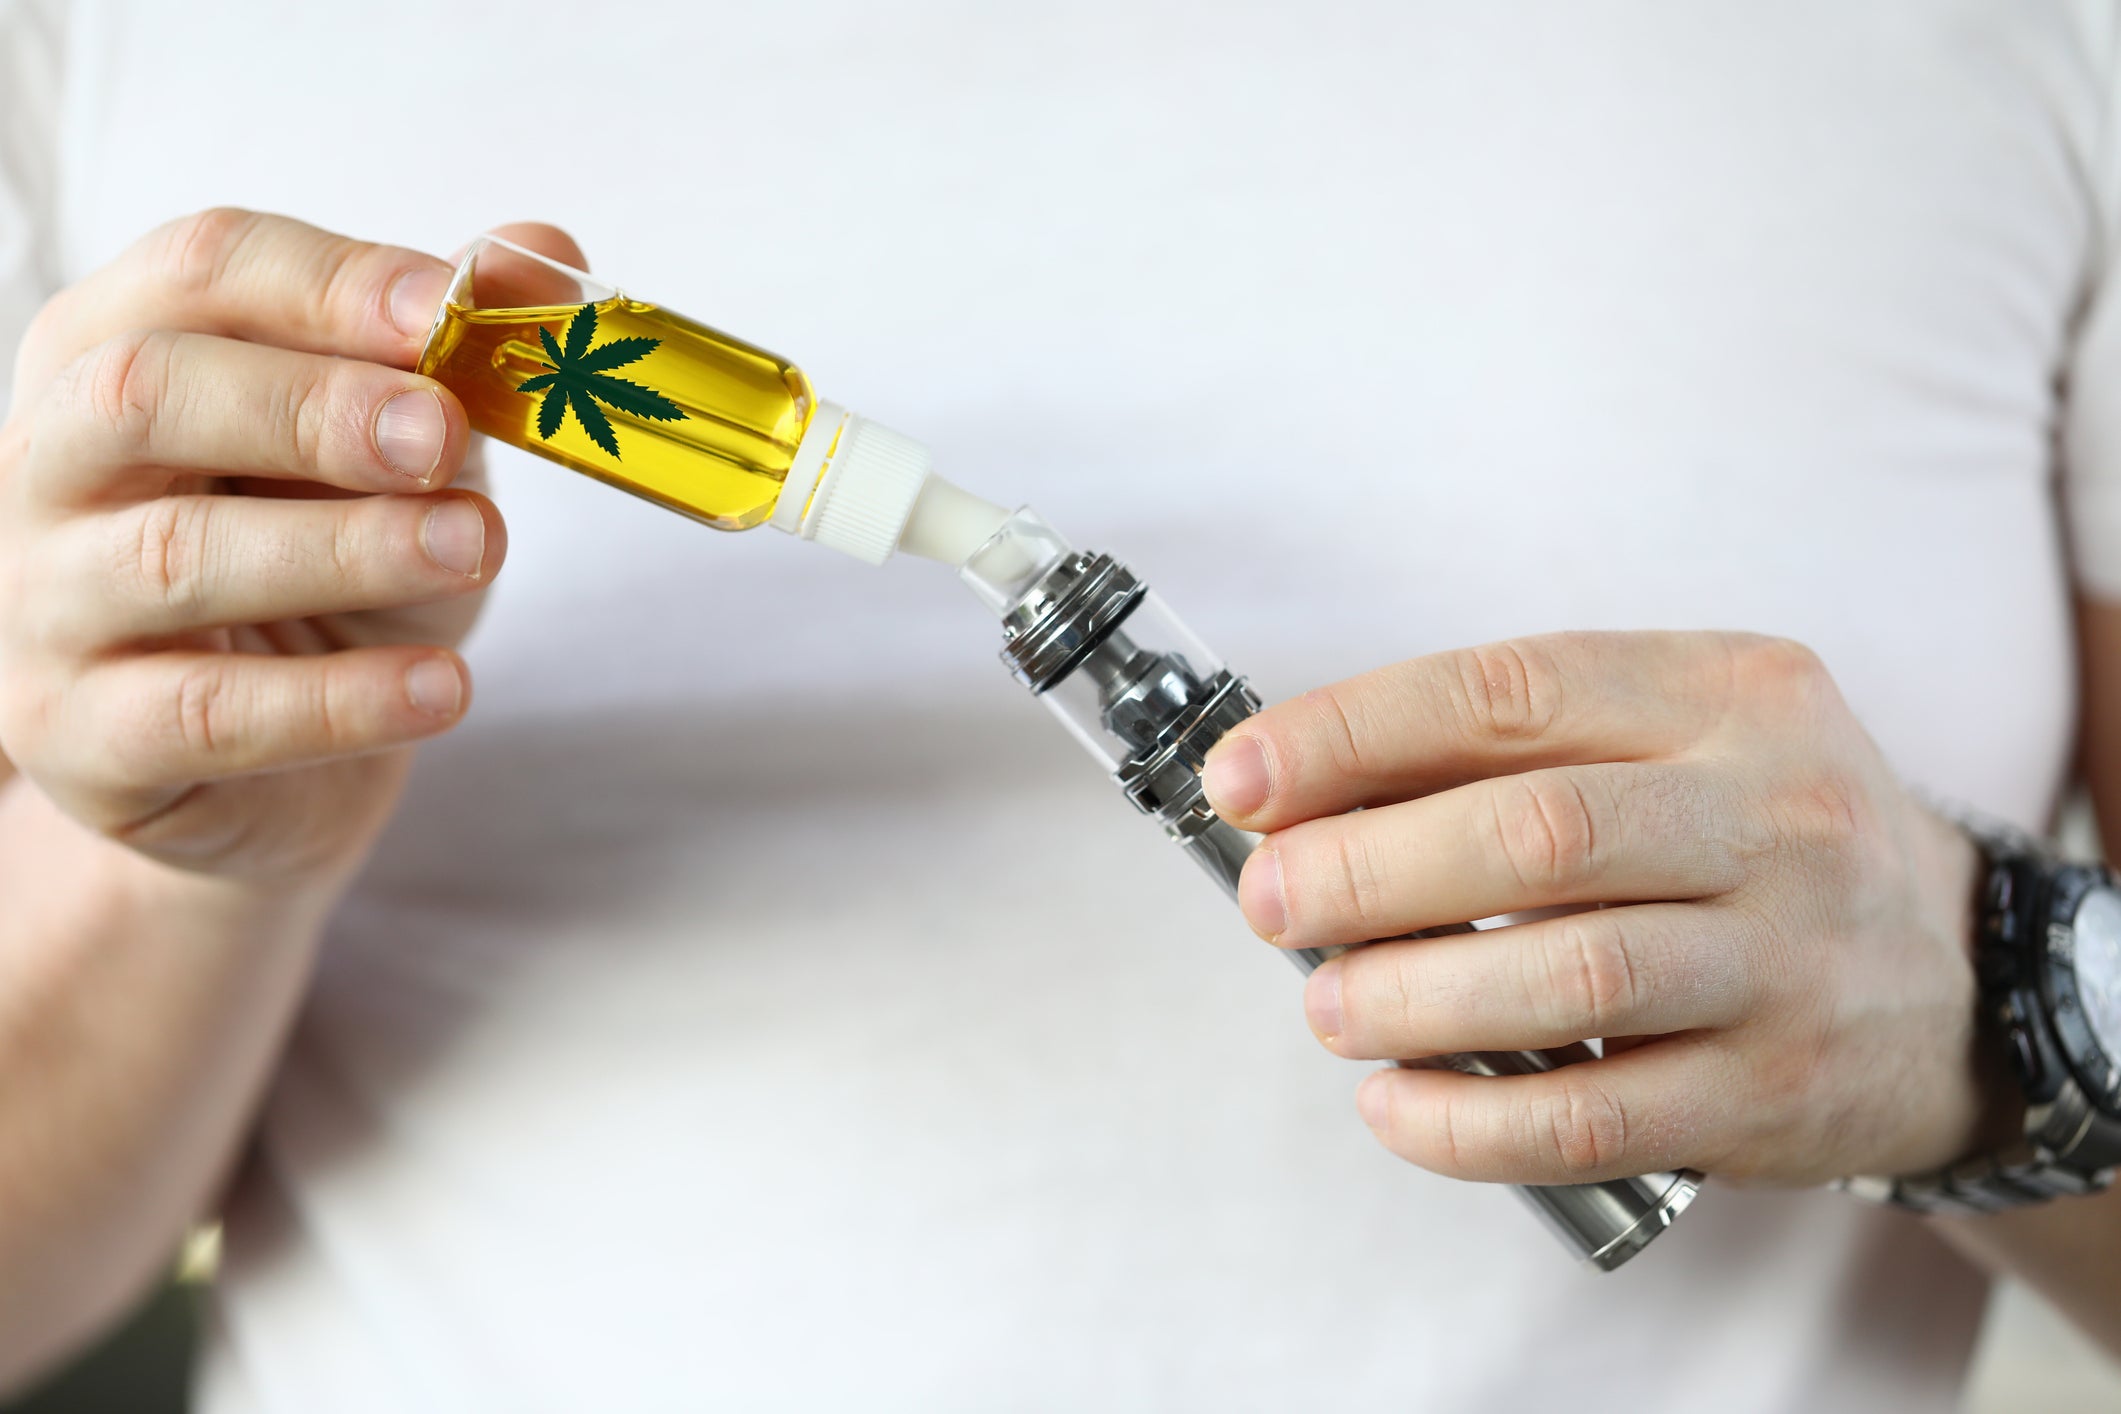 A person fills up a cannabis vape or dab pen with cannabis THC oil housed in a vial with the cannabis flower on it.